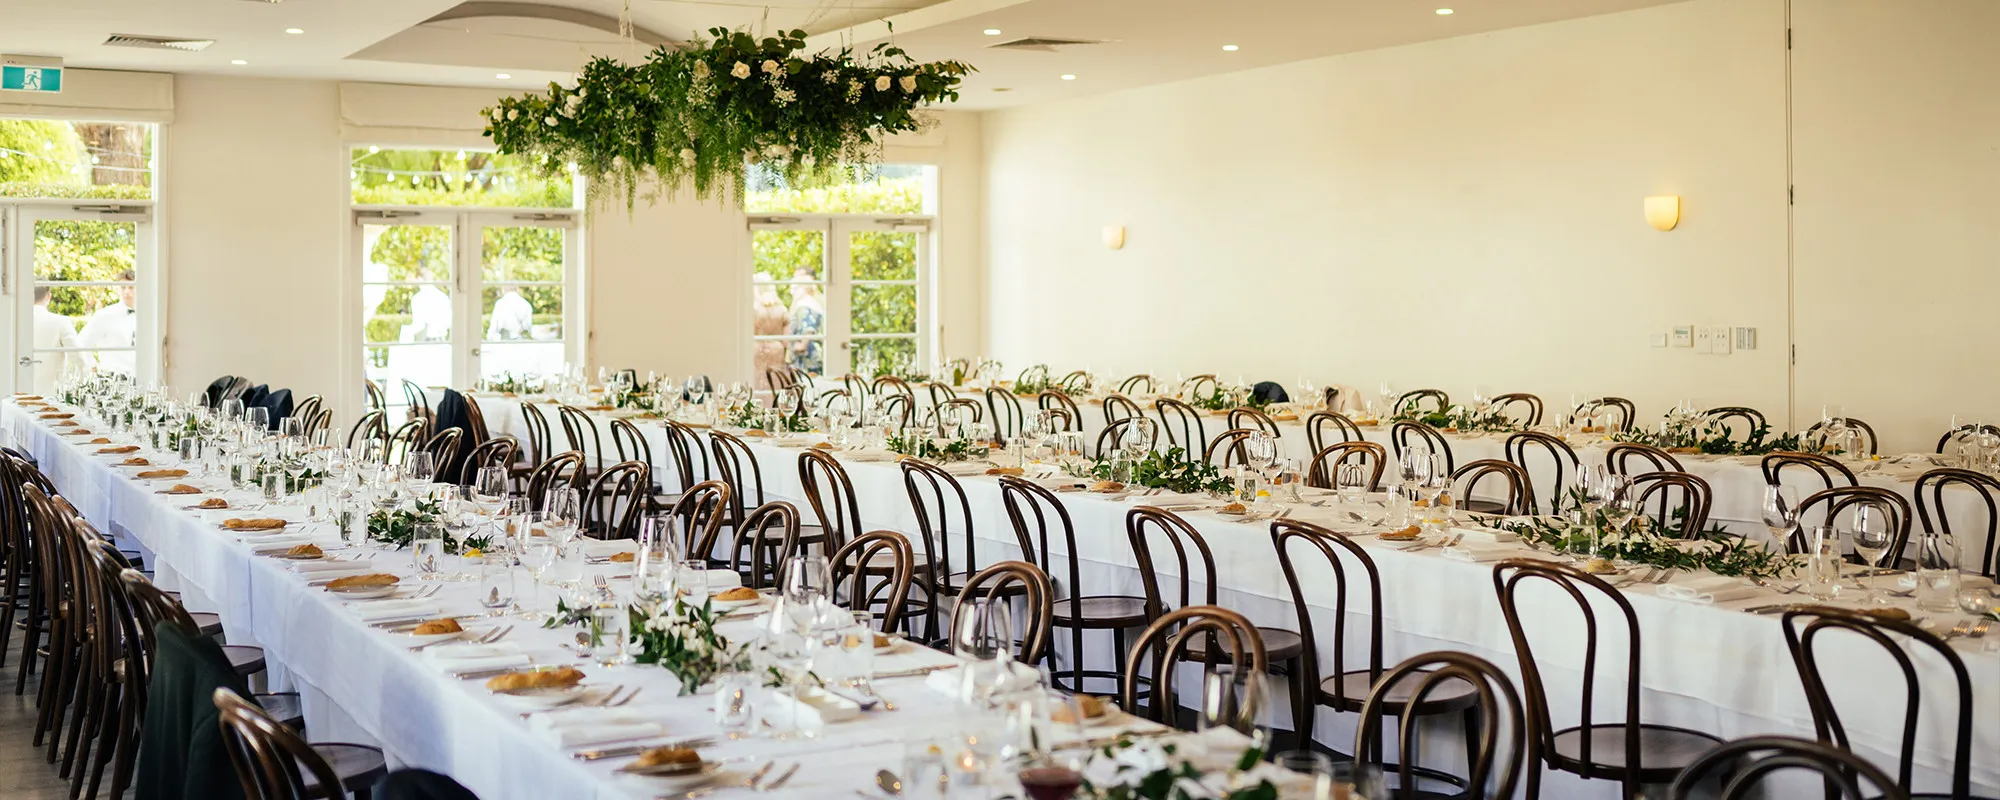 Lancemore Lindenderry Red Hill Boutique Luxury Accommodation Melbourne Wedding Venue Reception Motta Weddings 2000 x 800 2